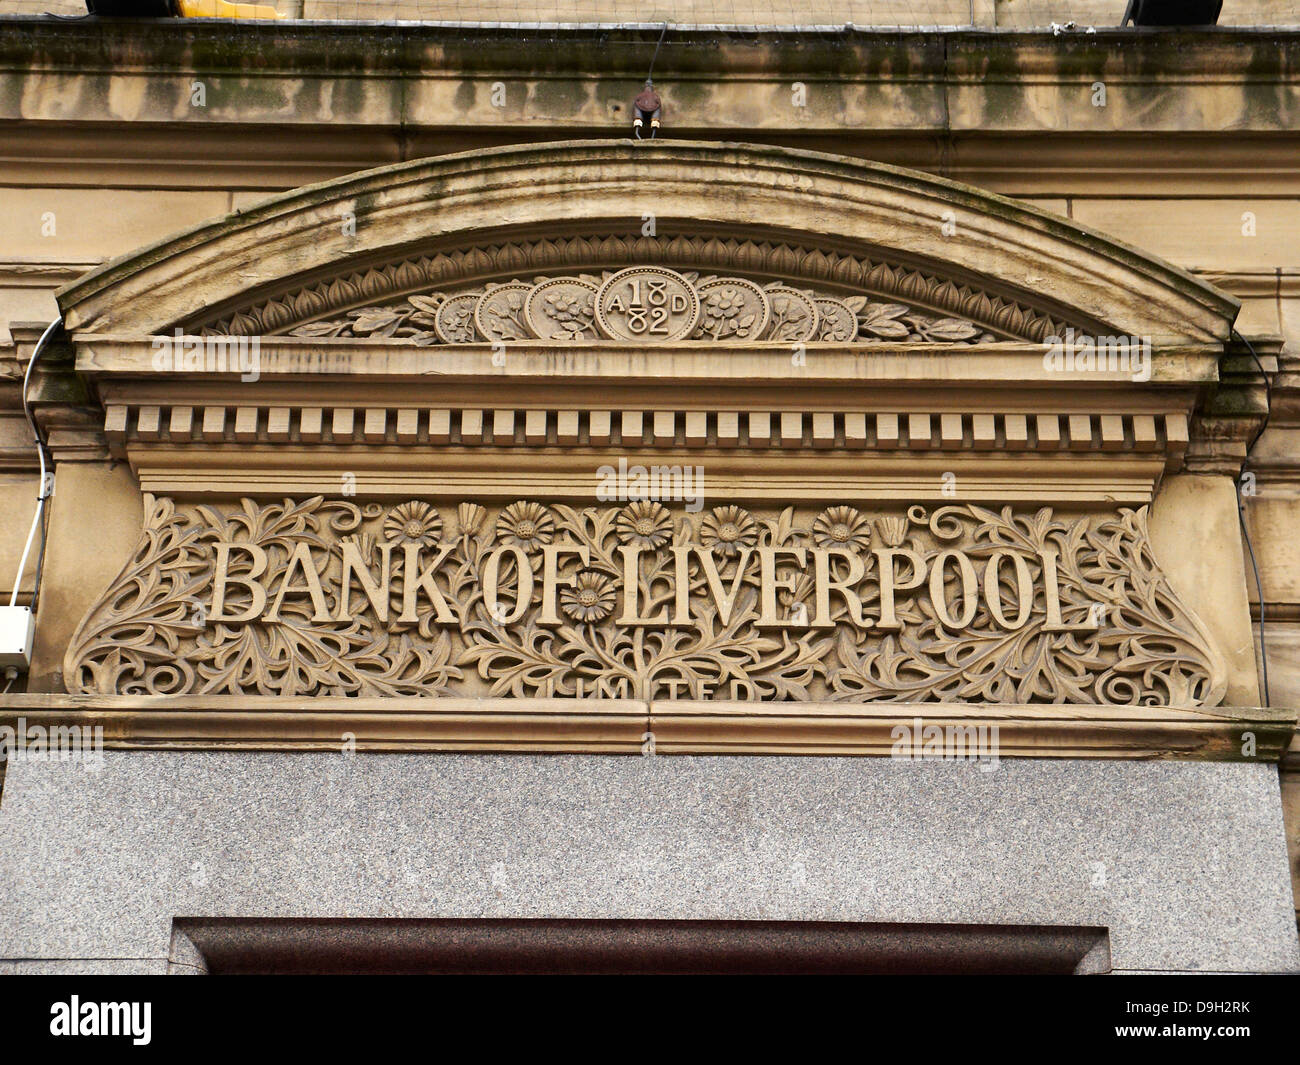 Bank of Liverpool sign above former bank building, now a Chinese restaurant UK Stock Photo